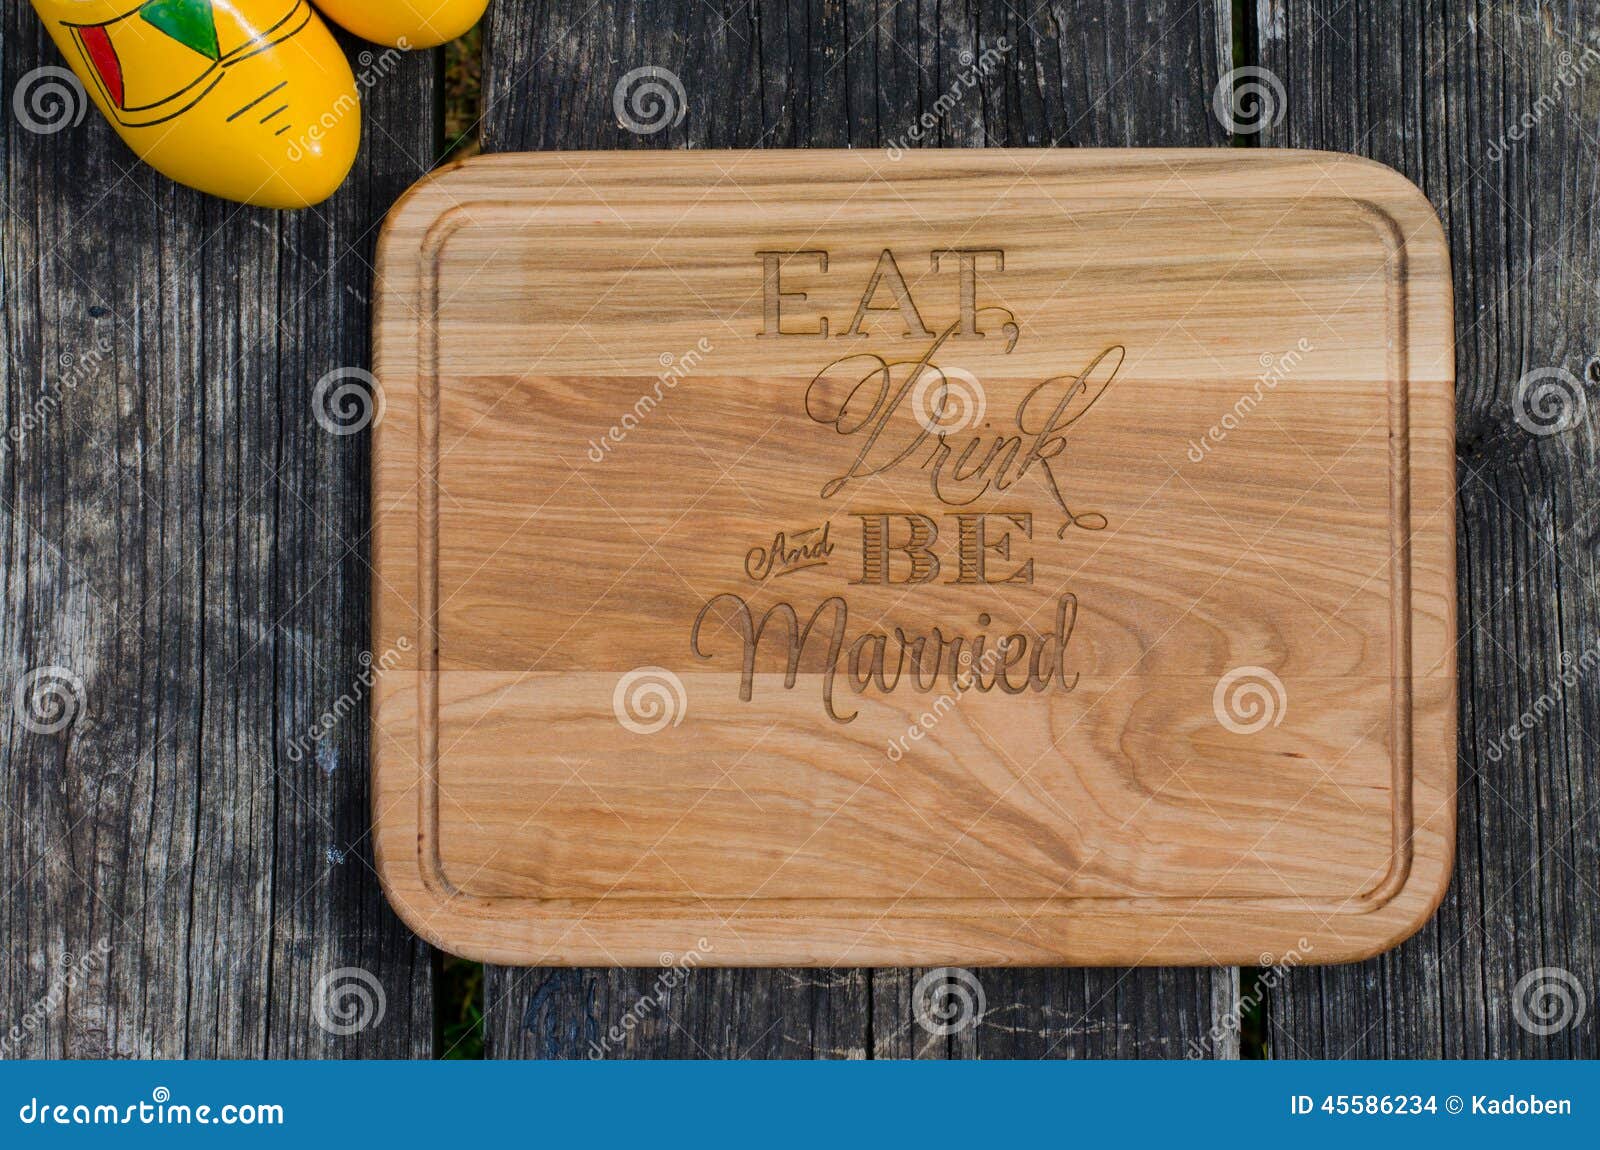 eat drink and be married wood cutting board